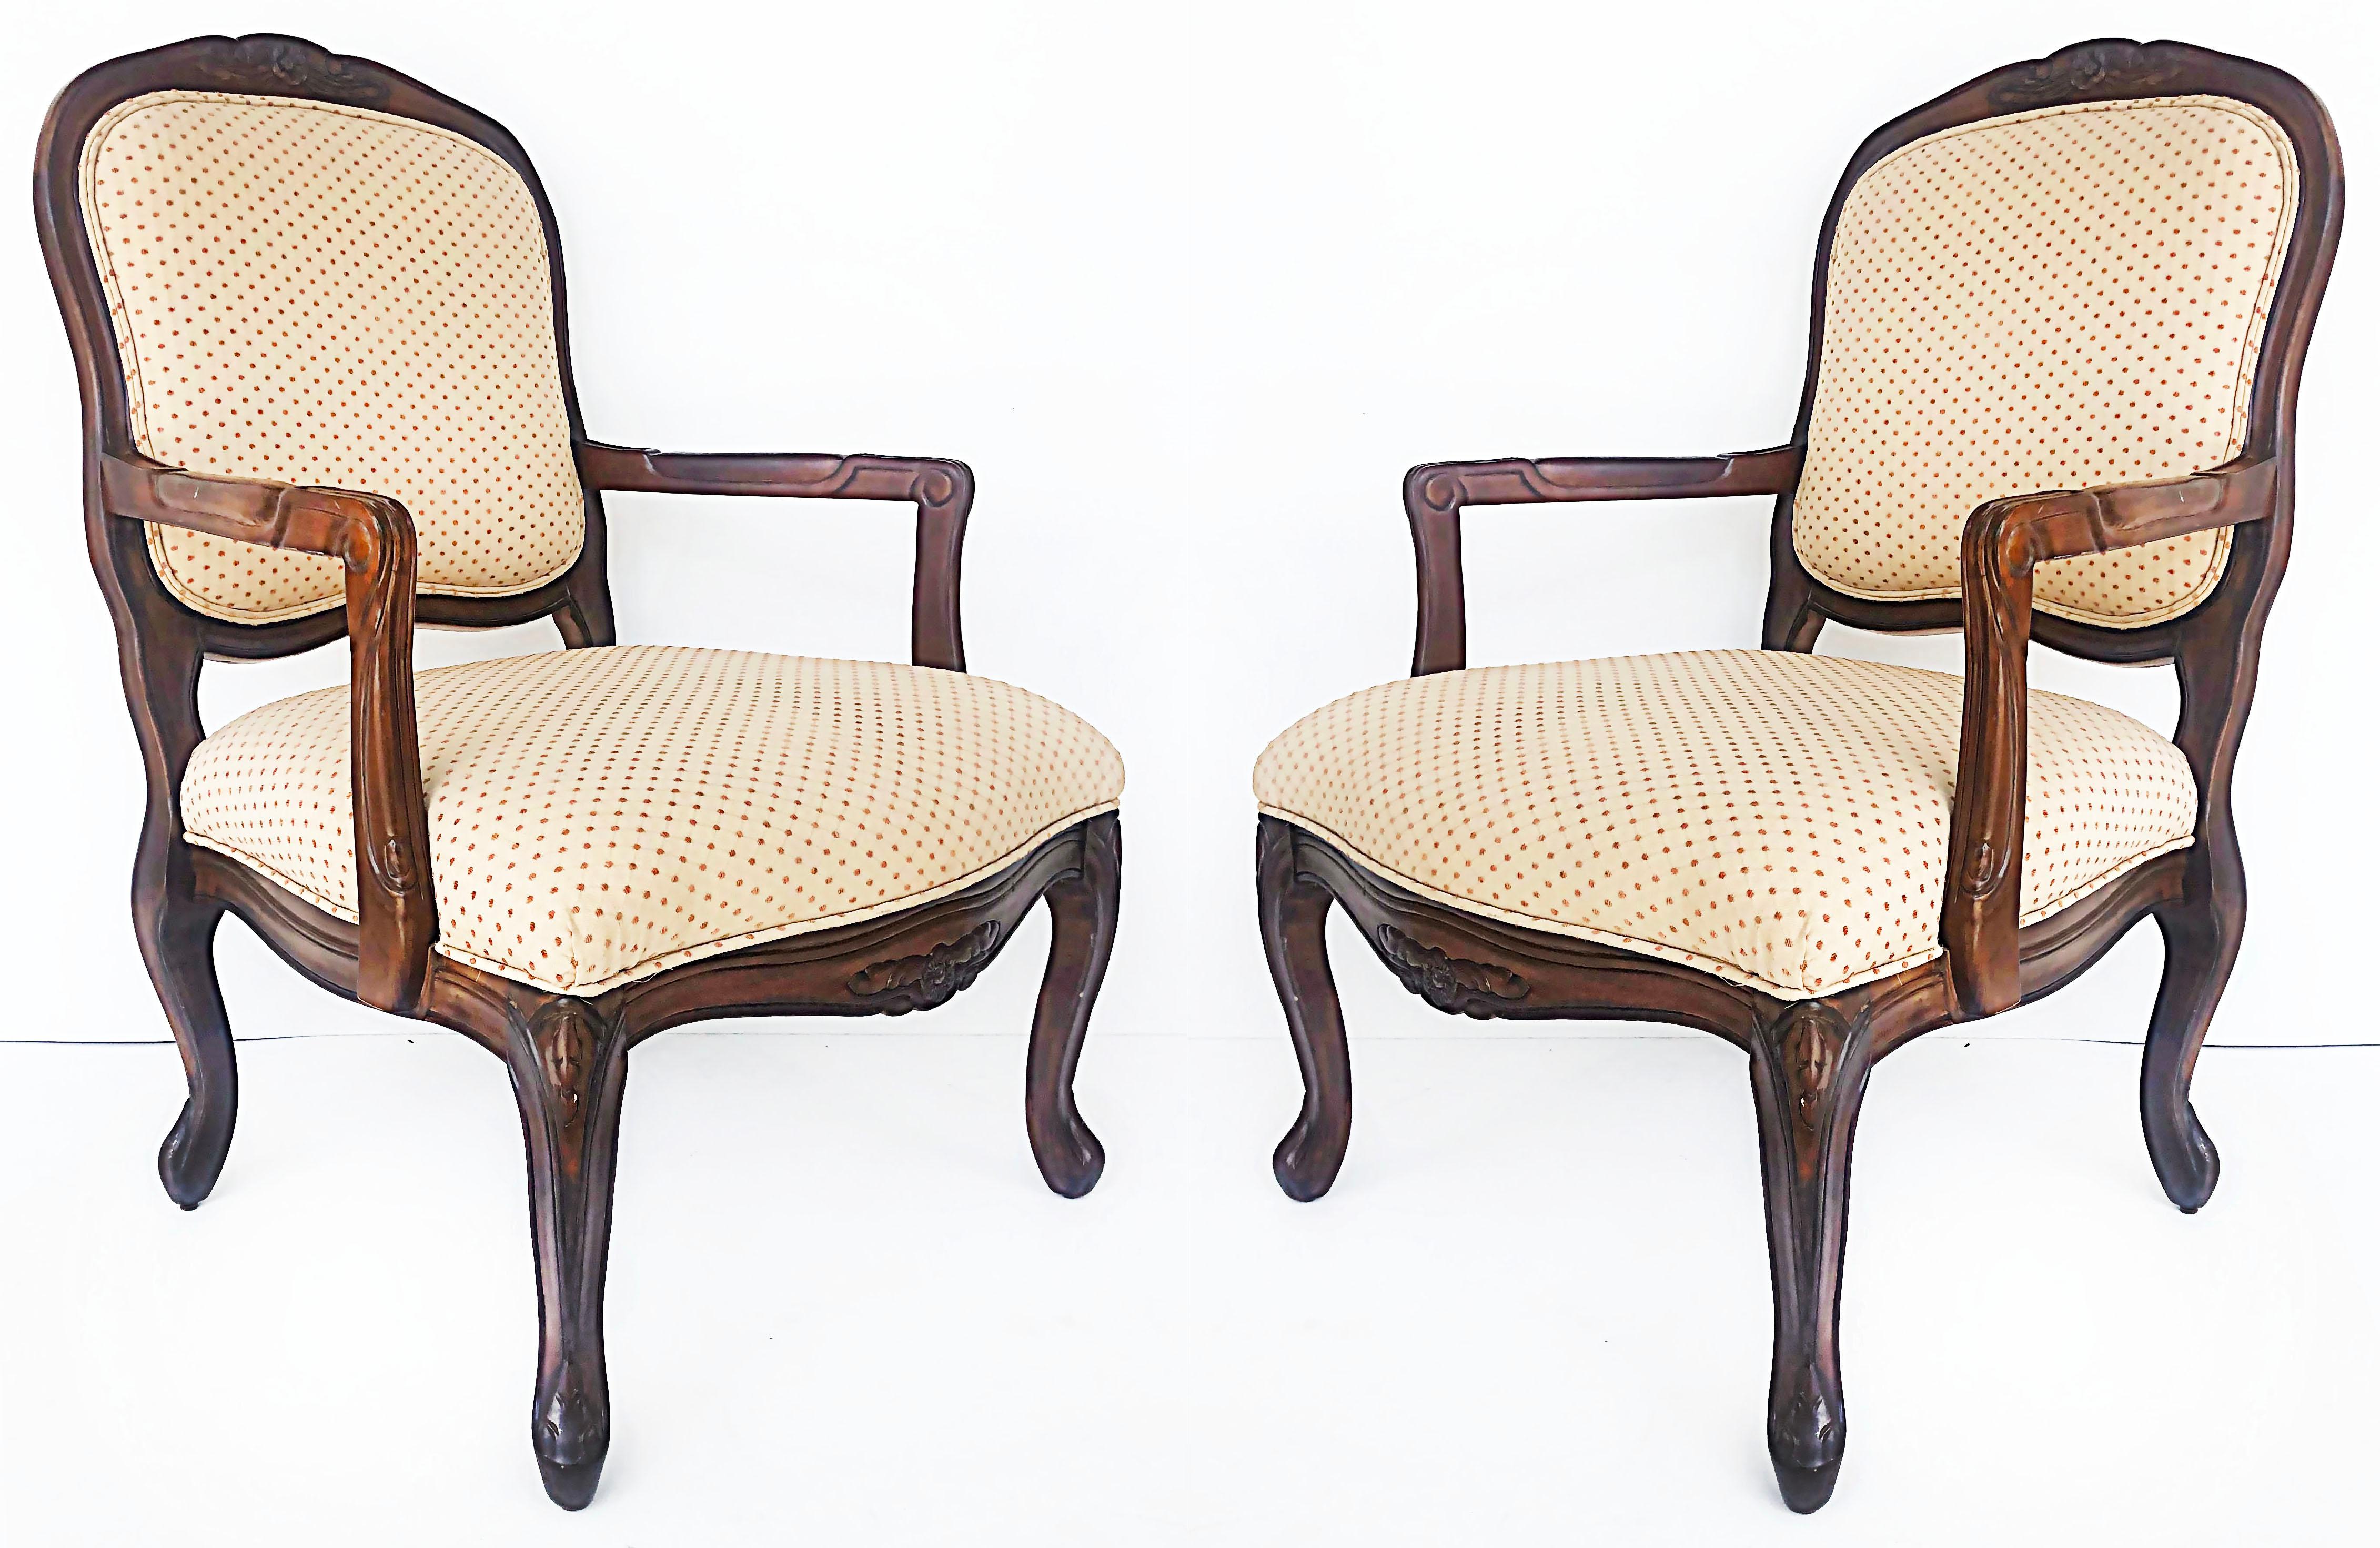 French Provincial Louis XV Style Fauteuils with Cabriole Legs For Sale 8